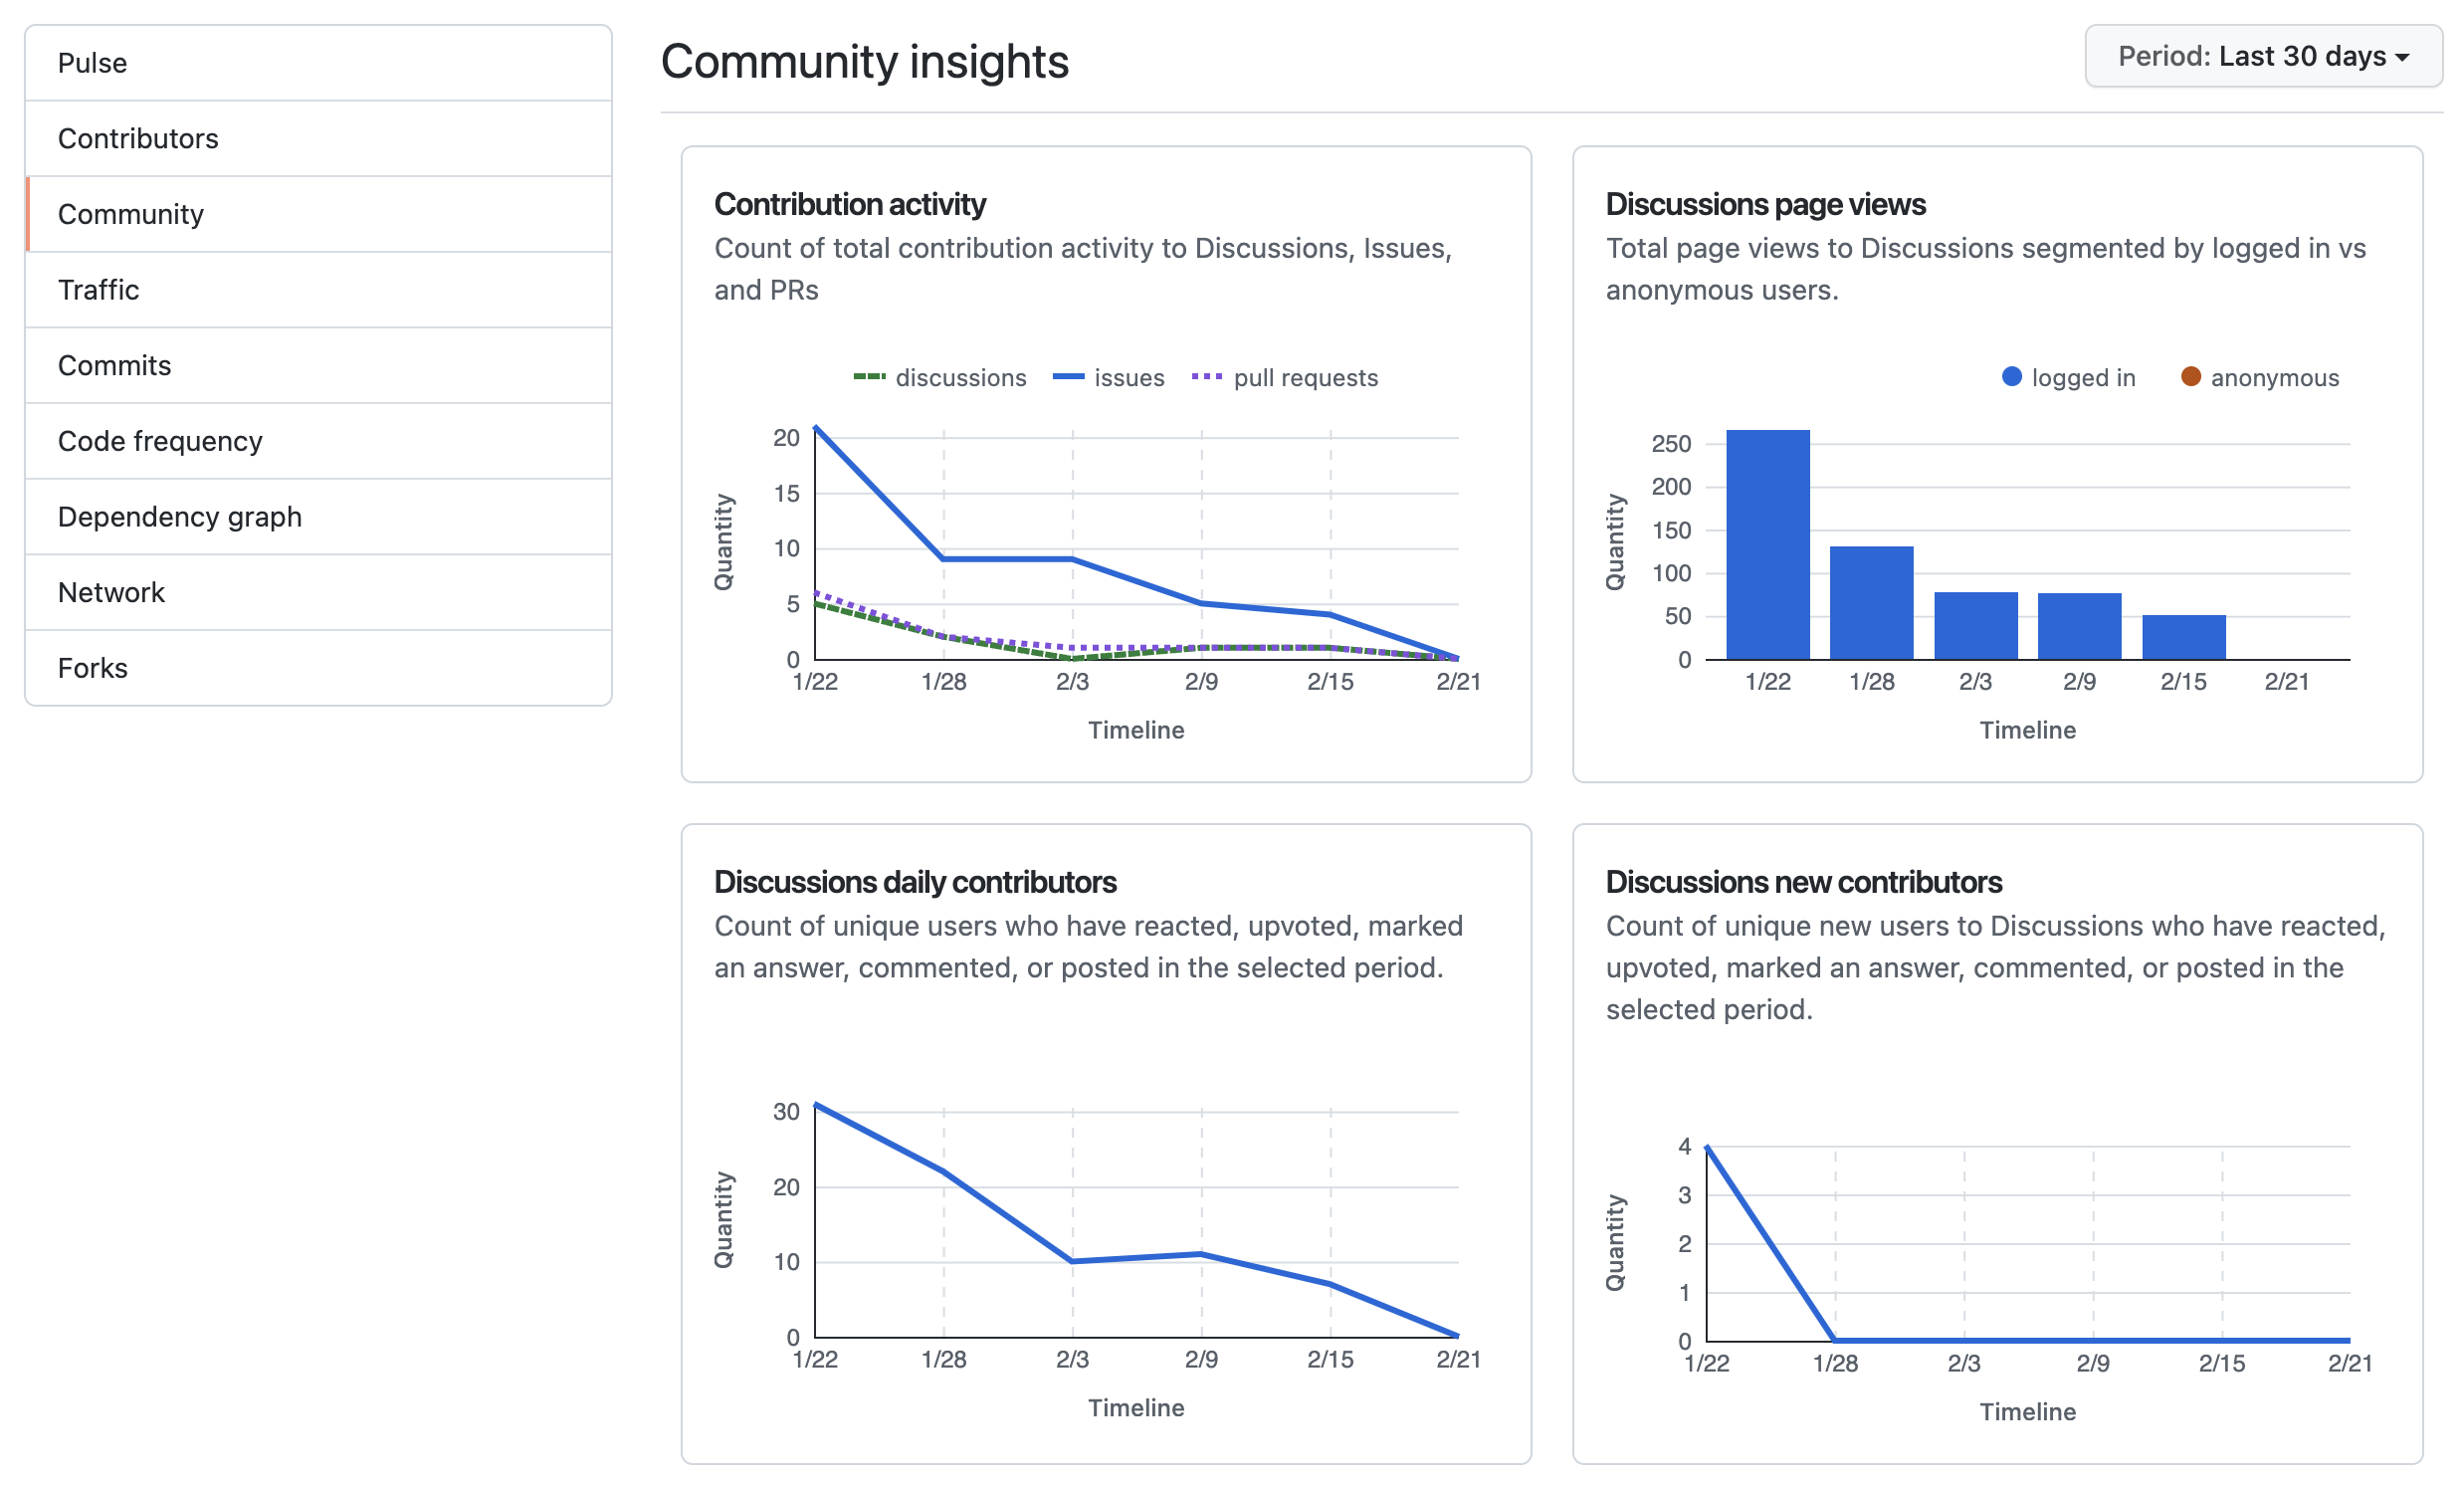 Screenshot of the "Community insights" page. A dashboard displays graphs for data related to Discussions, such as page views.